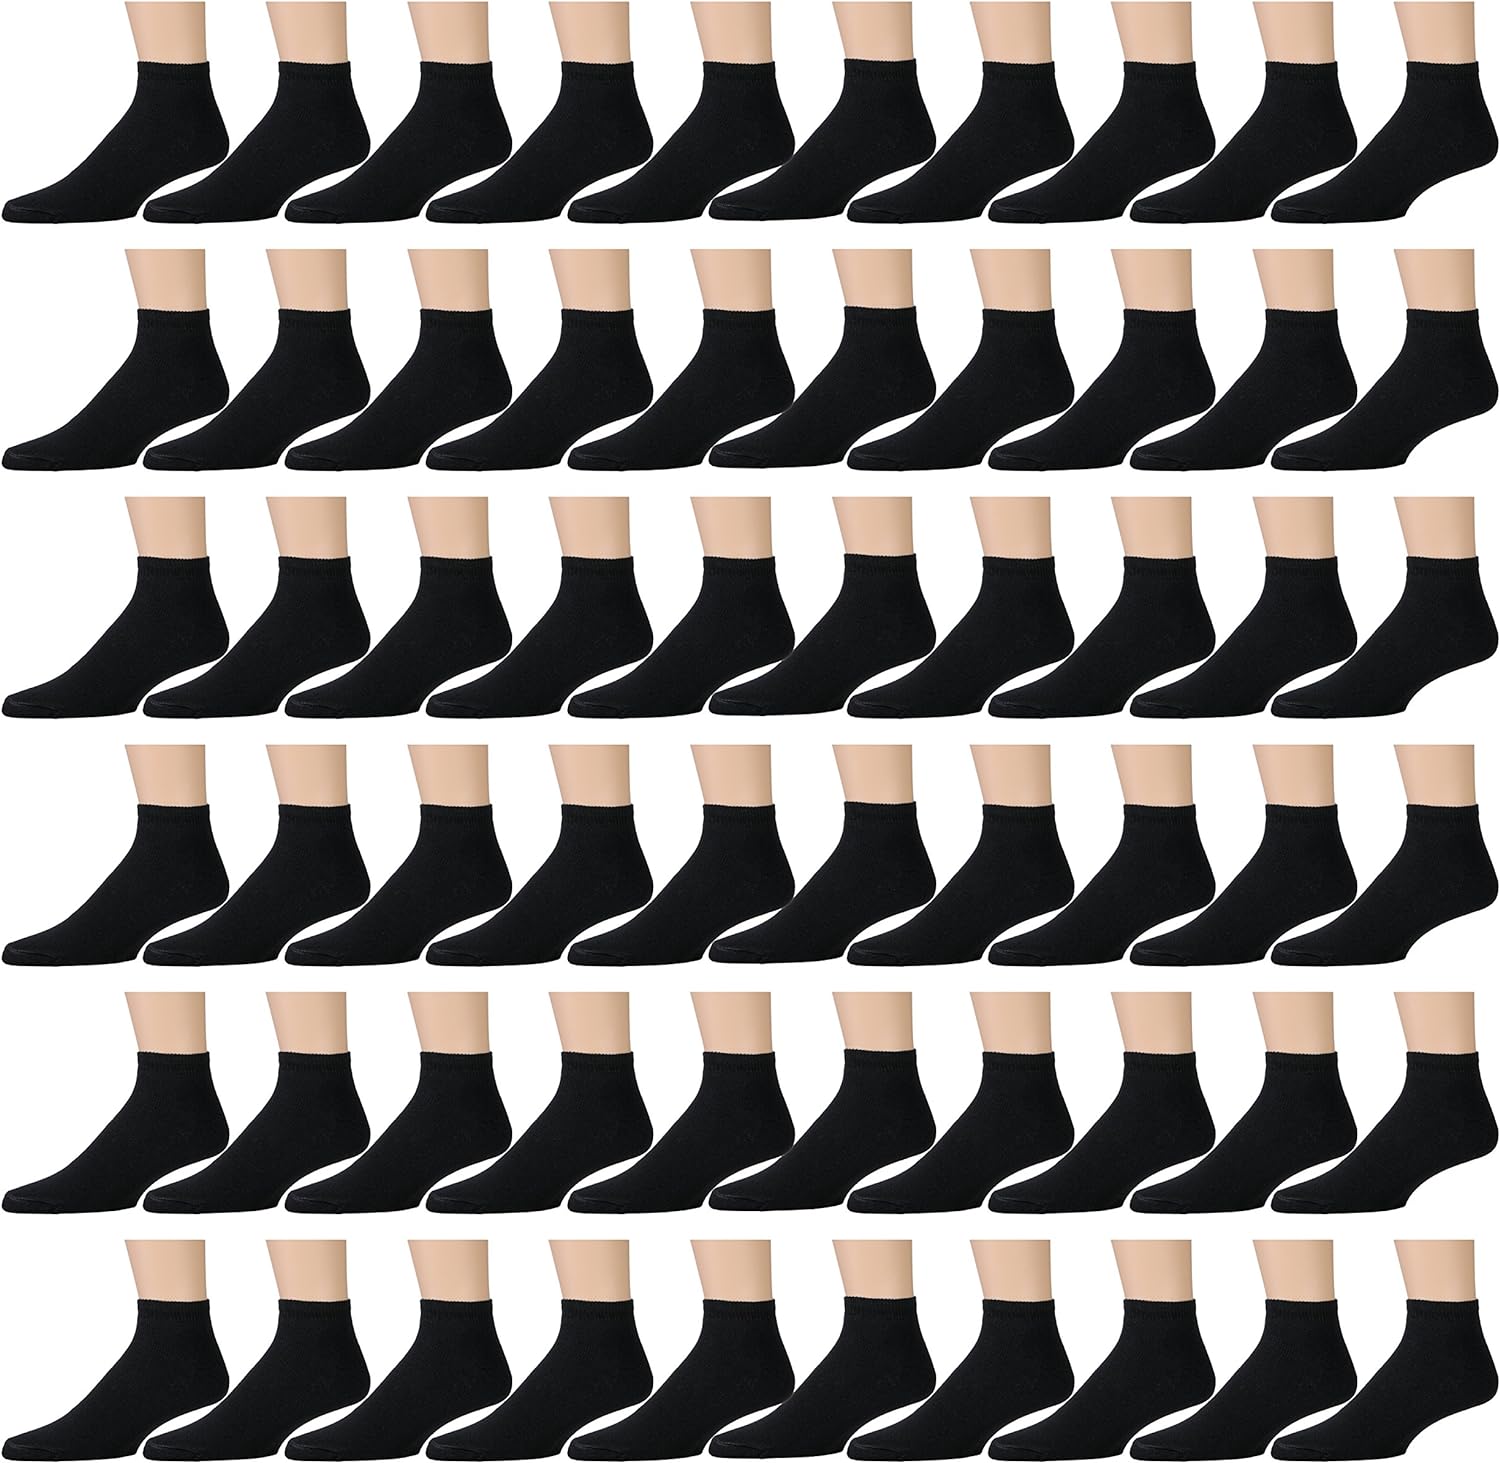 Yacht & Smith Wholesale Bulk Cotton Diabetic Crew And Ankle Socks, Loose Fit Top Non-Binding Medical Socks (60 Pack Black Ankle, Women (9-11))